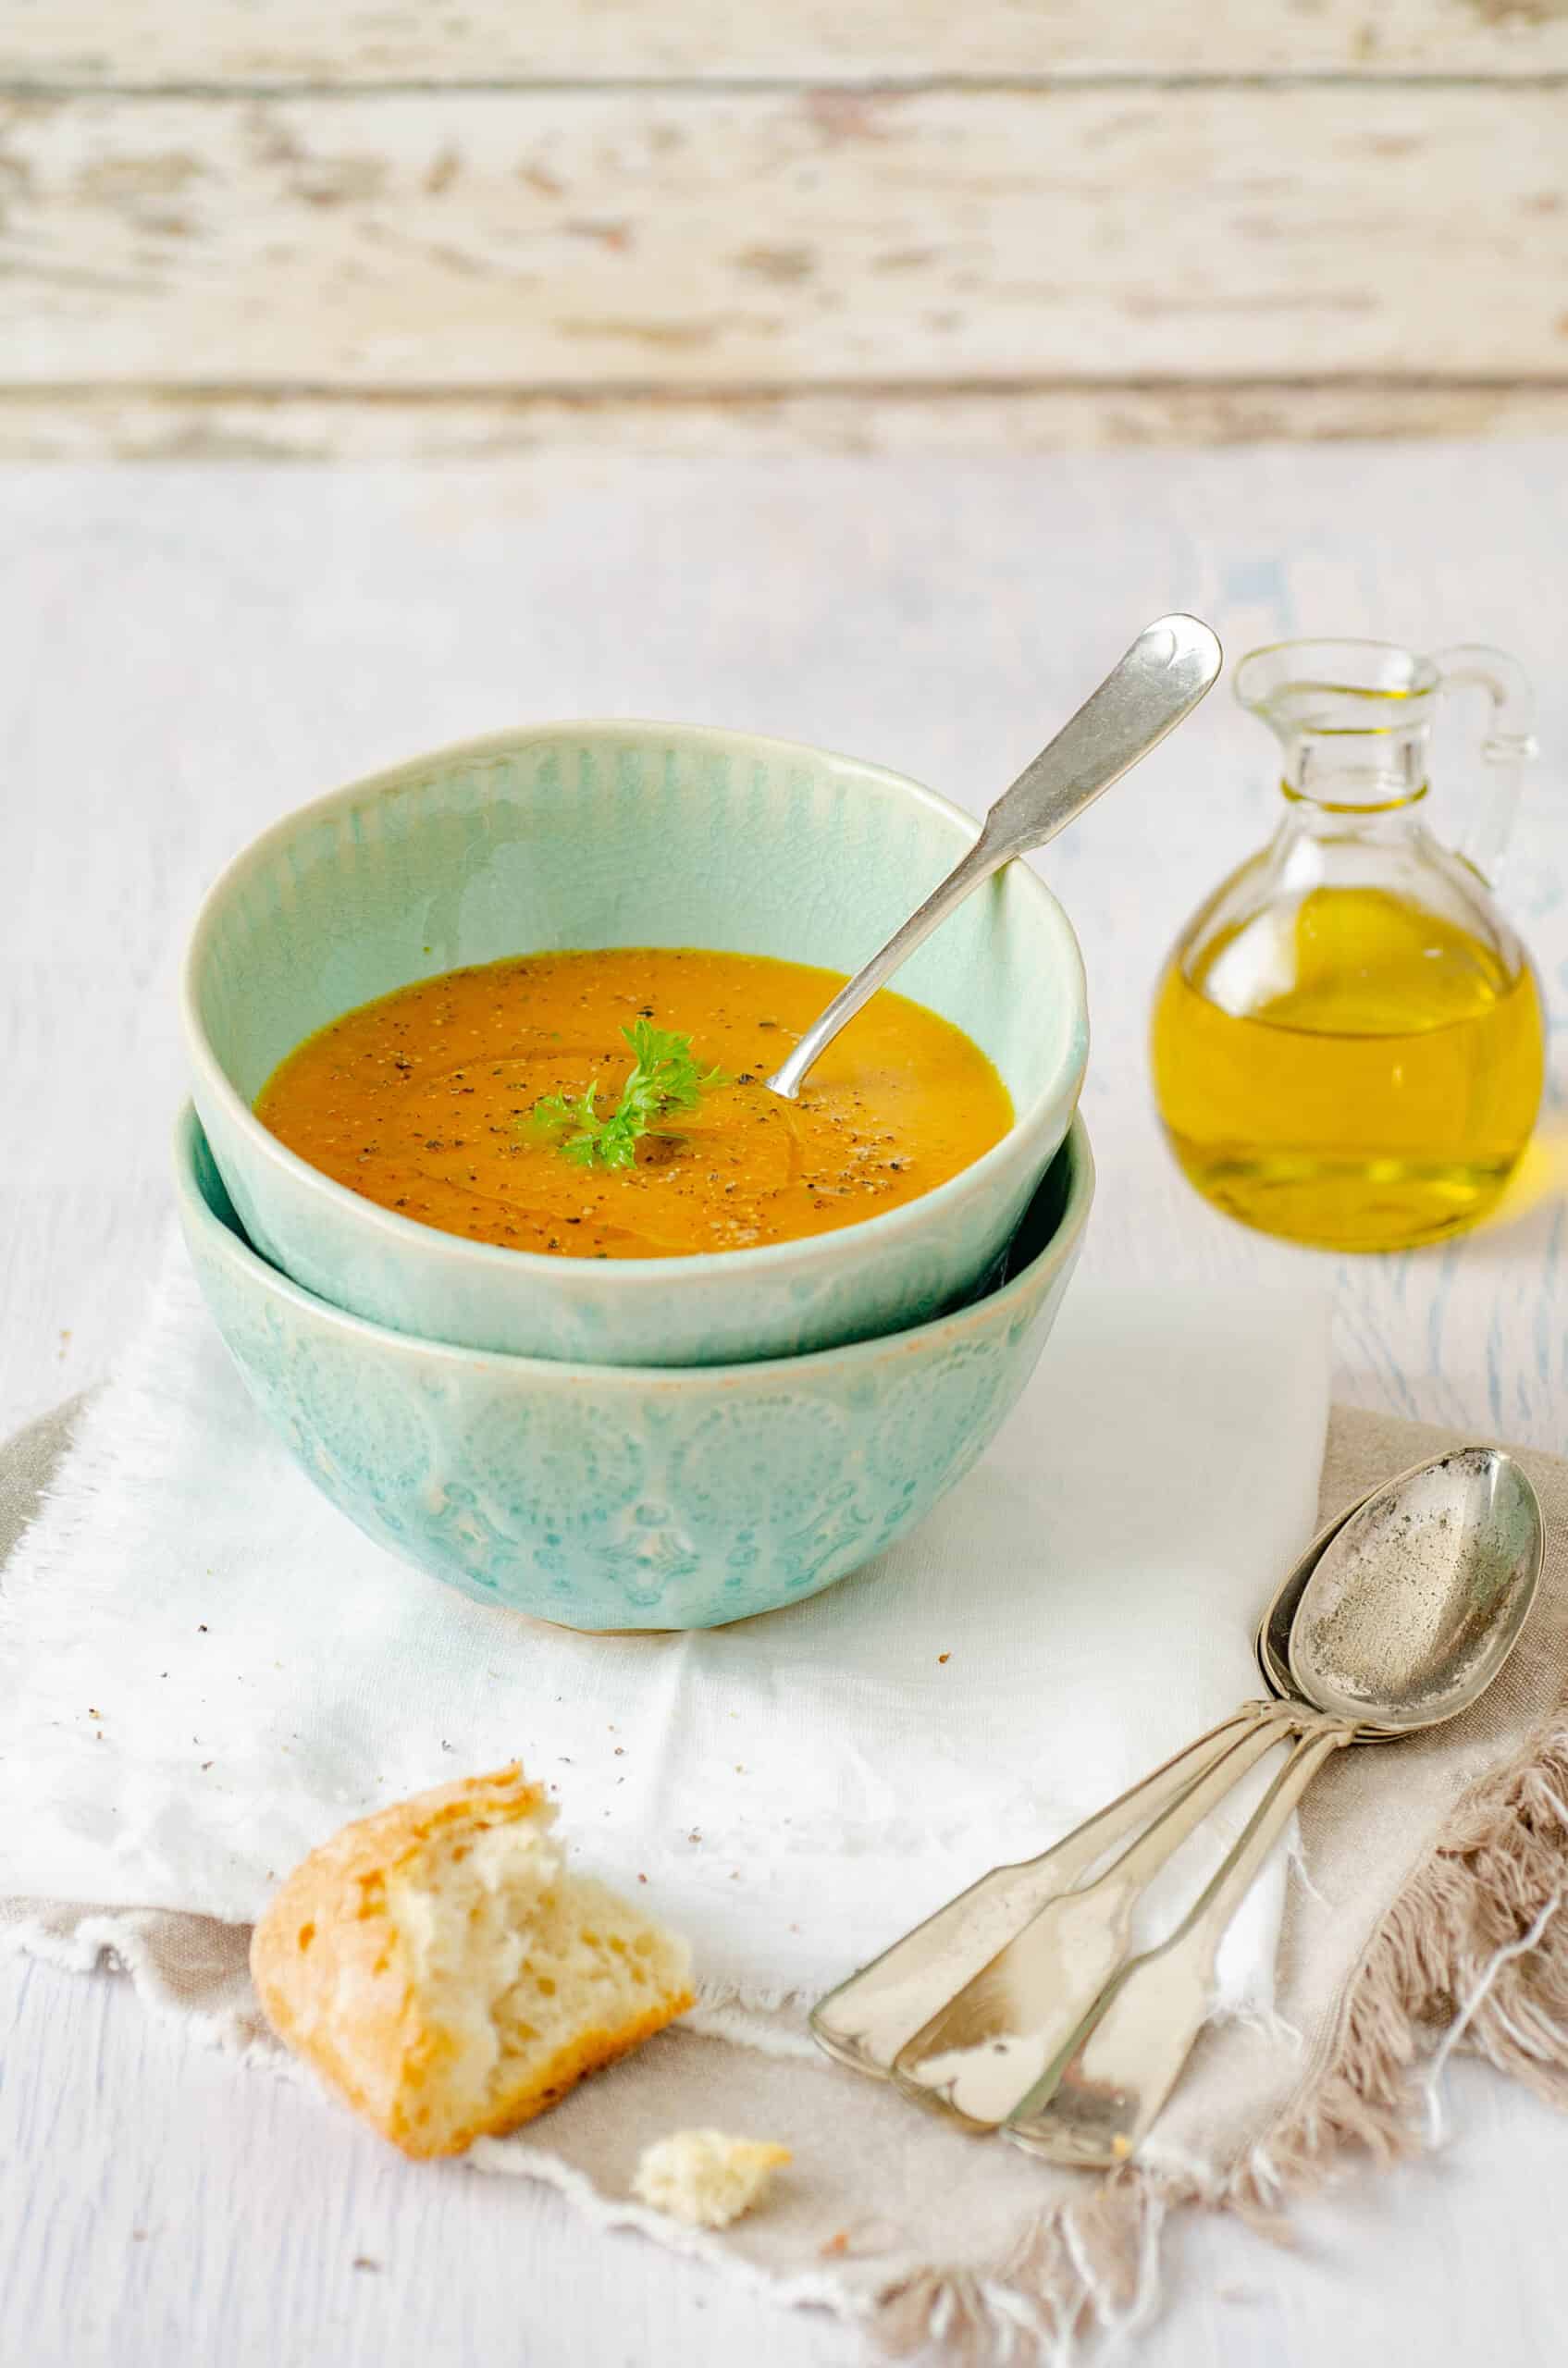 Roasted carrot soup.